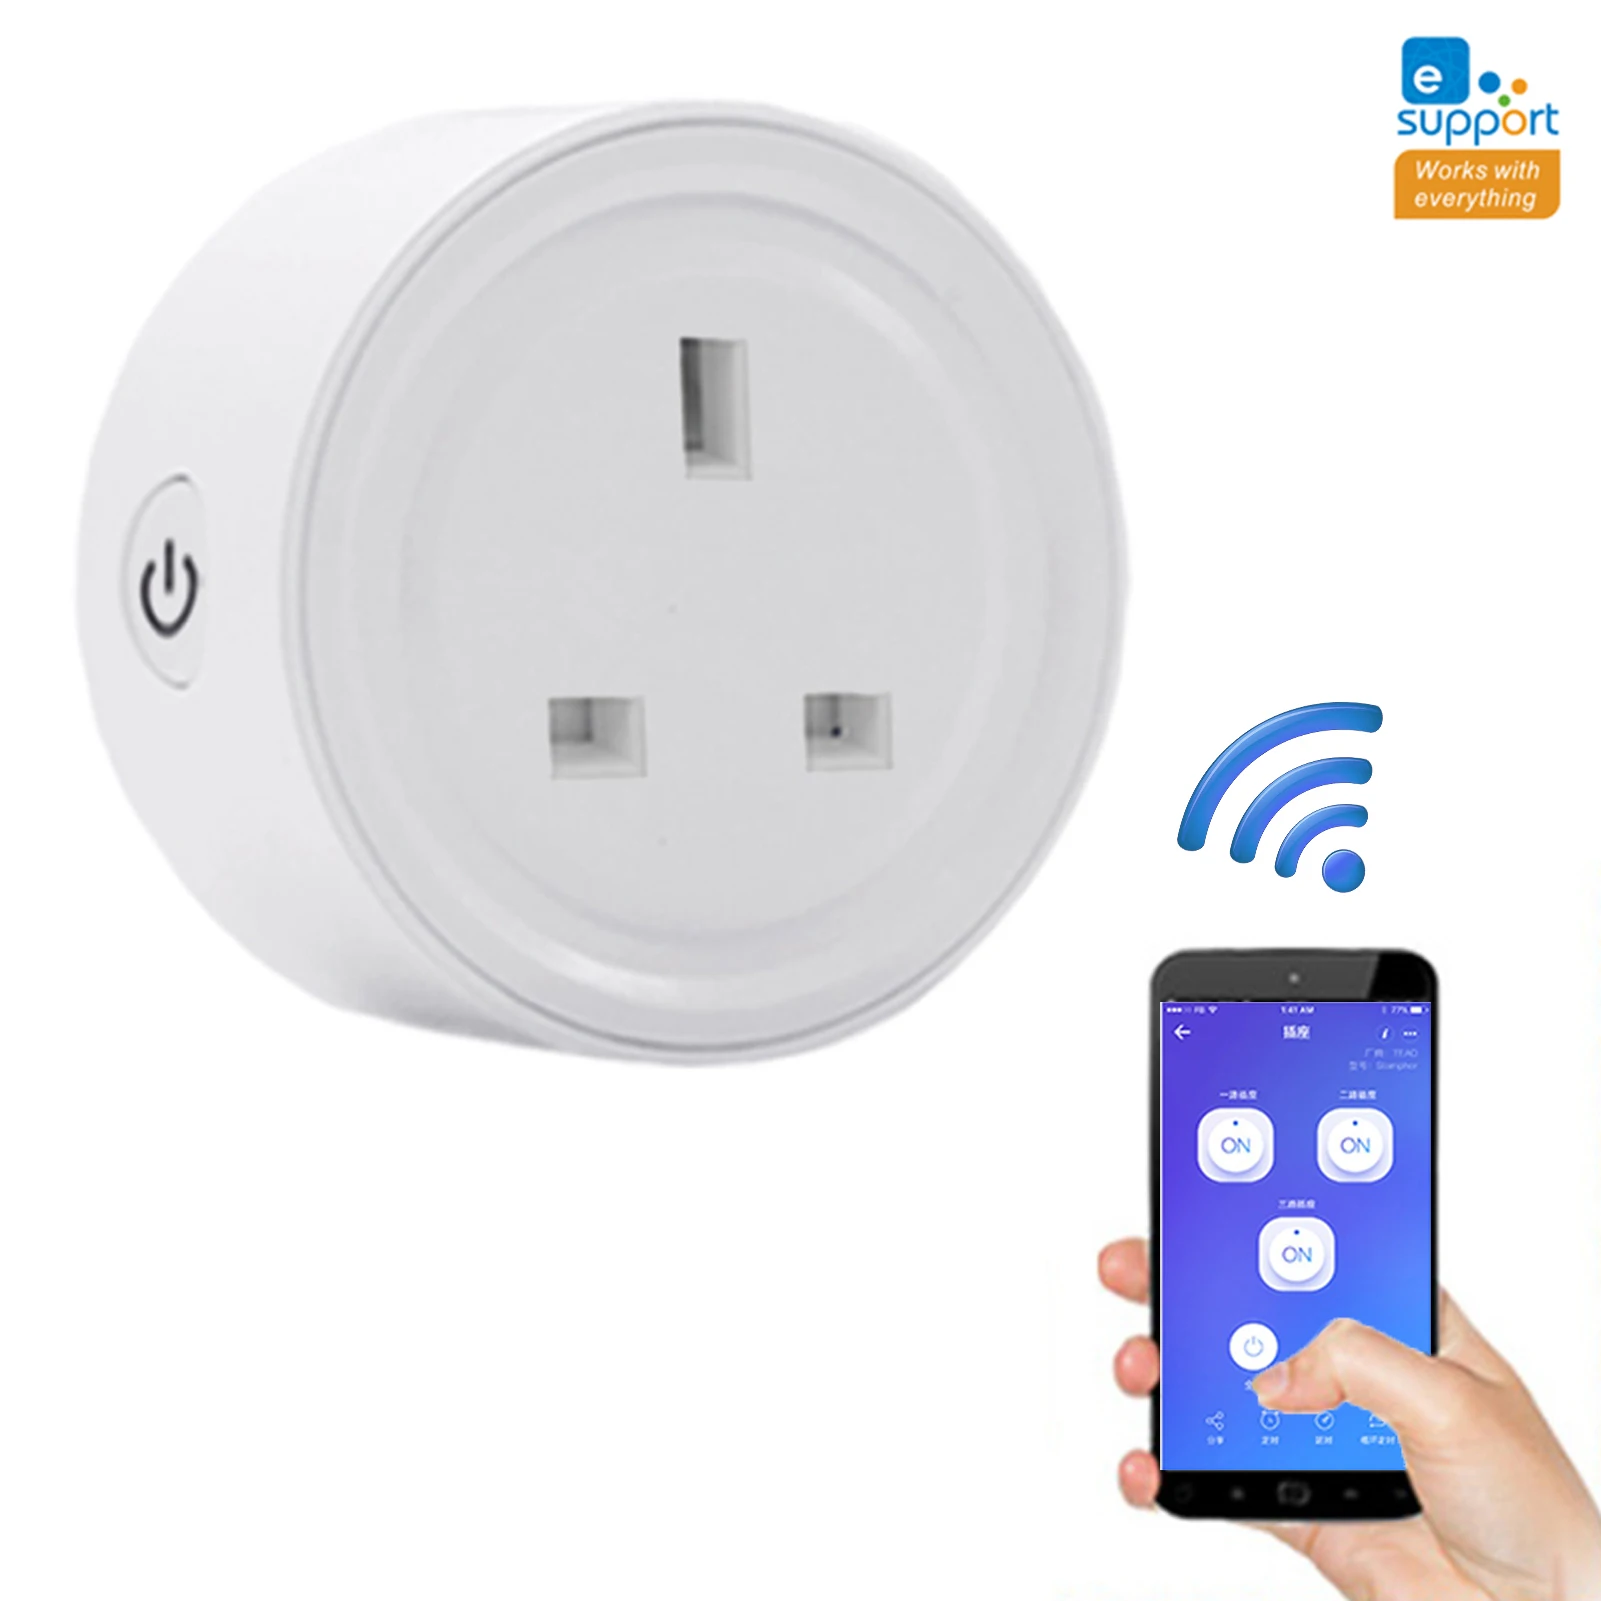 

WiFi Smart Plug Smart Home Outlet Works With Alexas Voice And Remote Control Timer Function No Hub Required Smart Home Devices